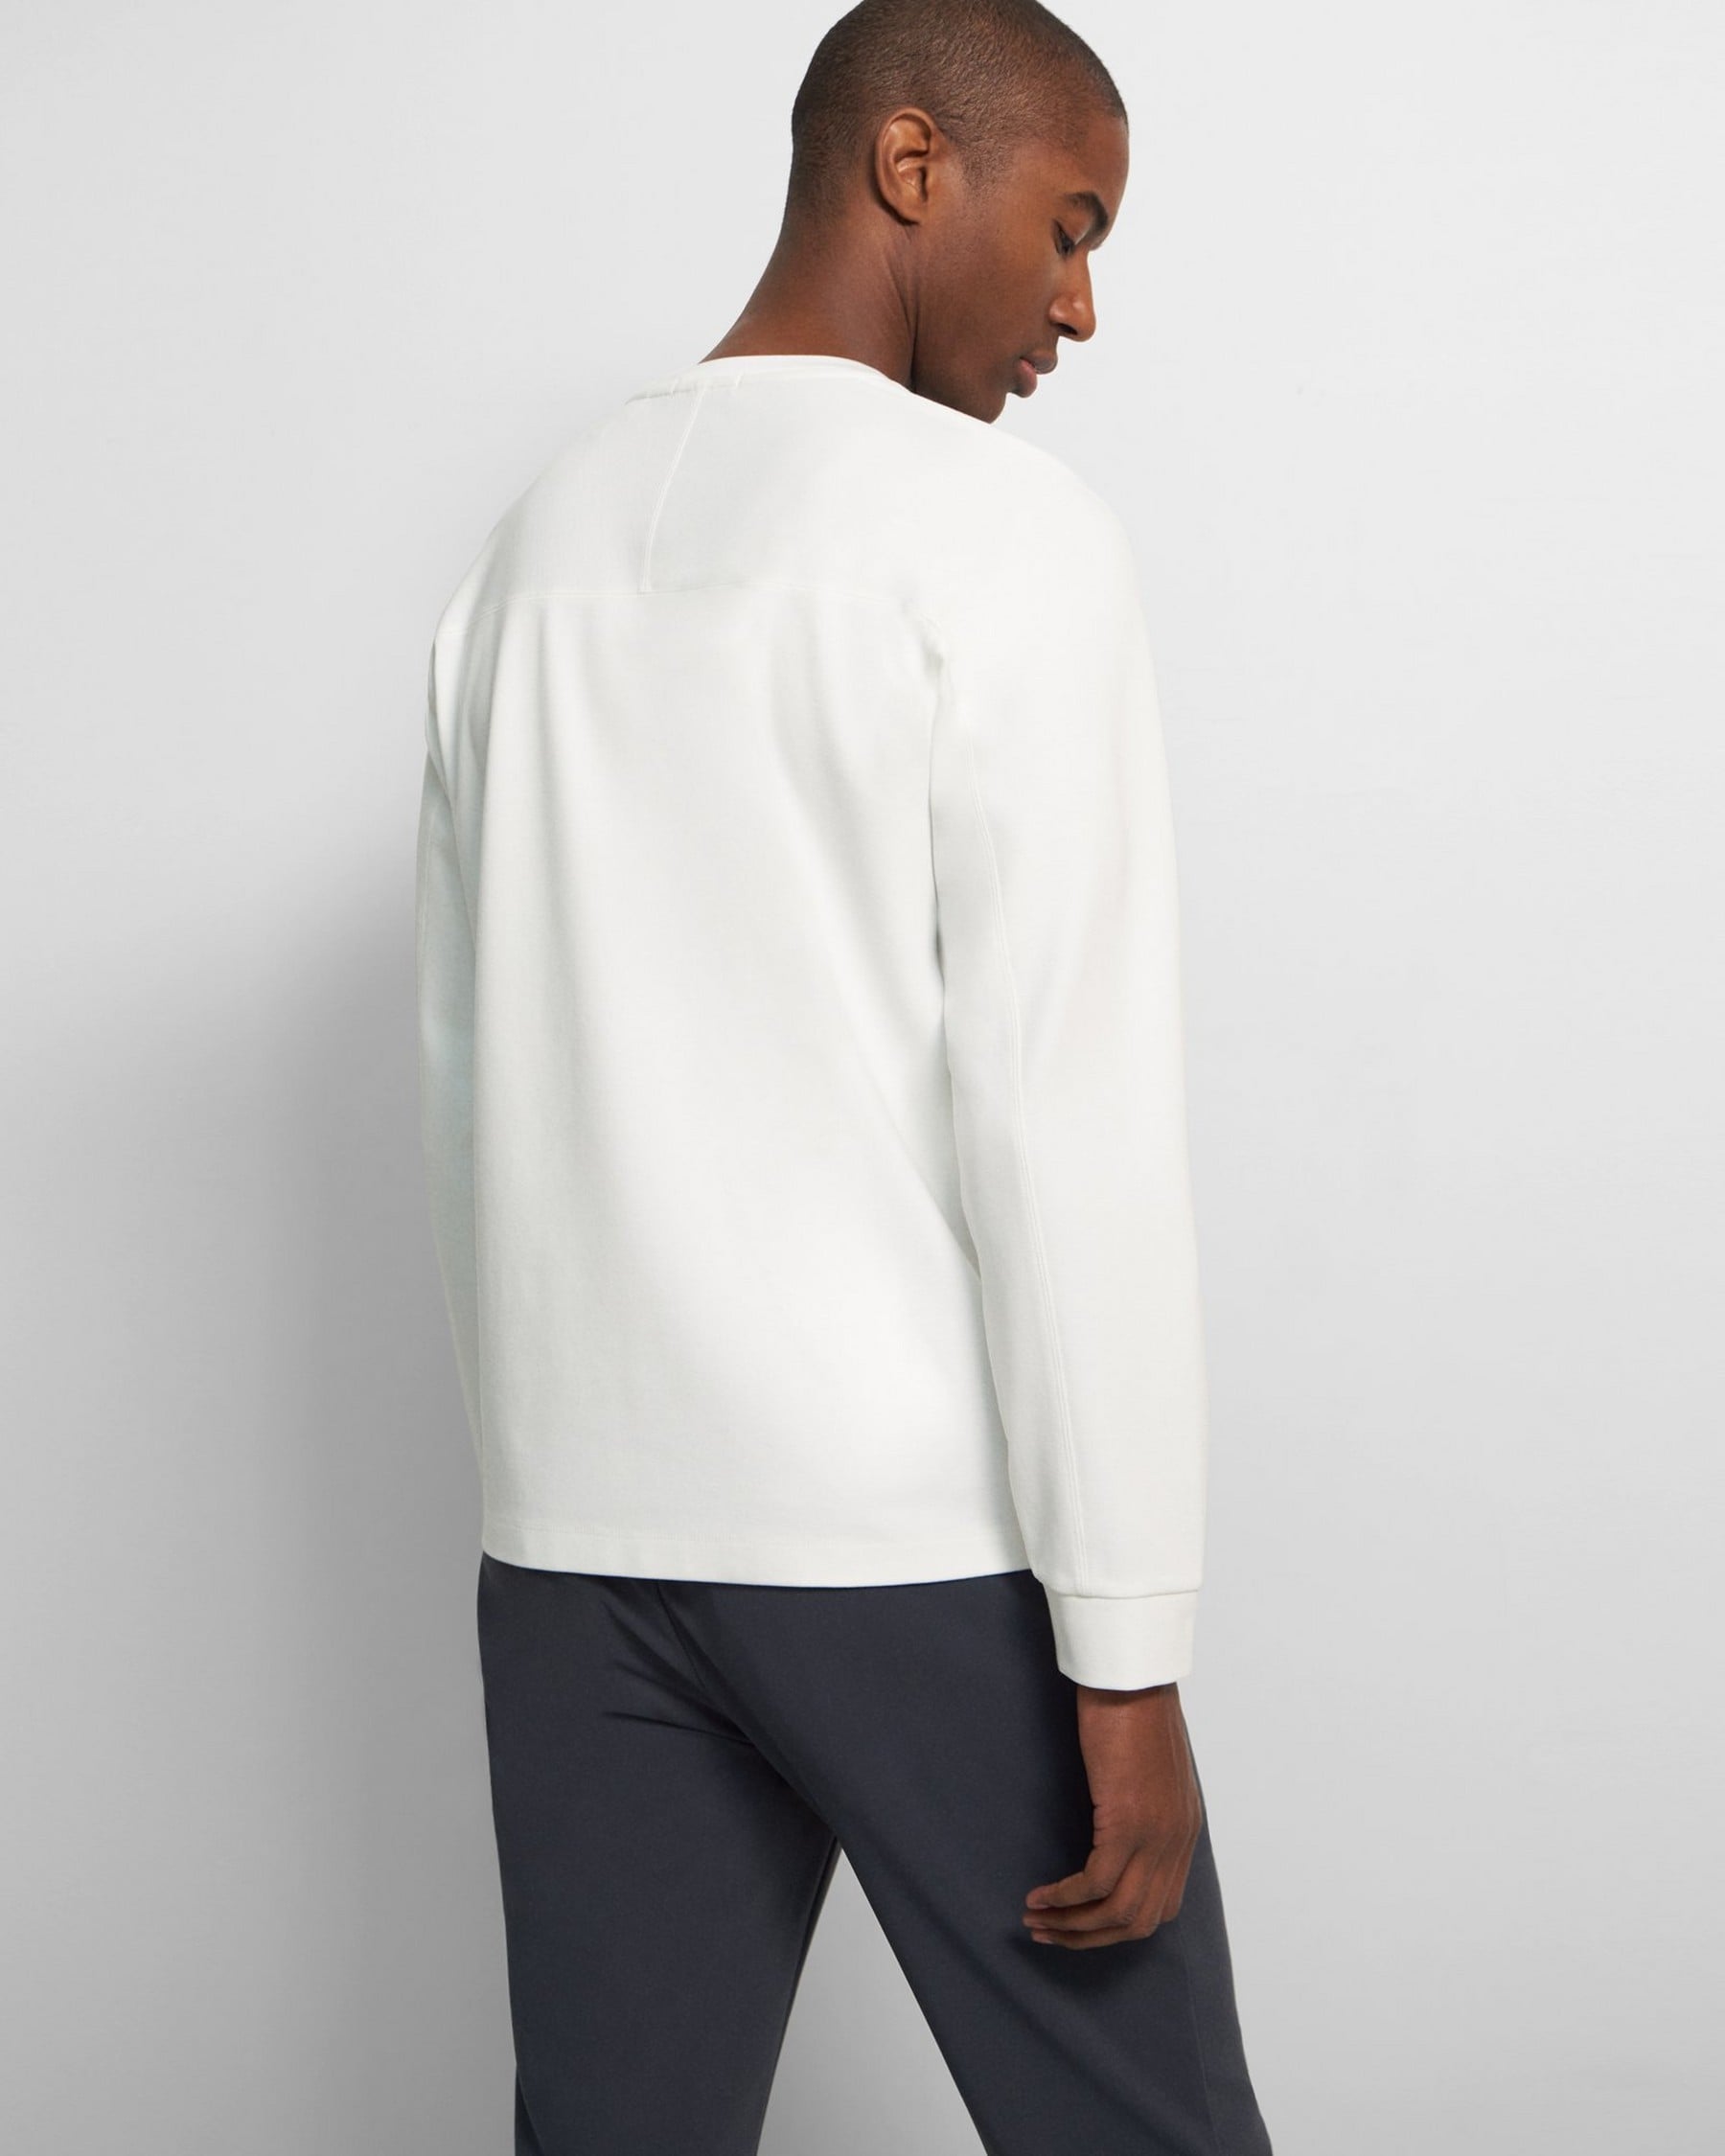 Ryder Long-Sleeve Tee in Relay Jersey